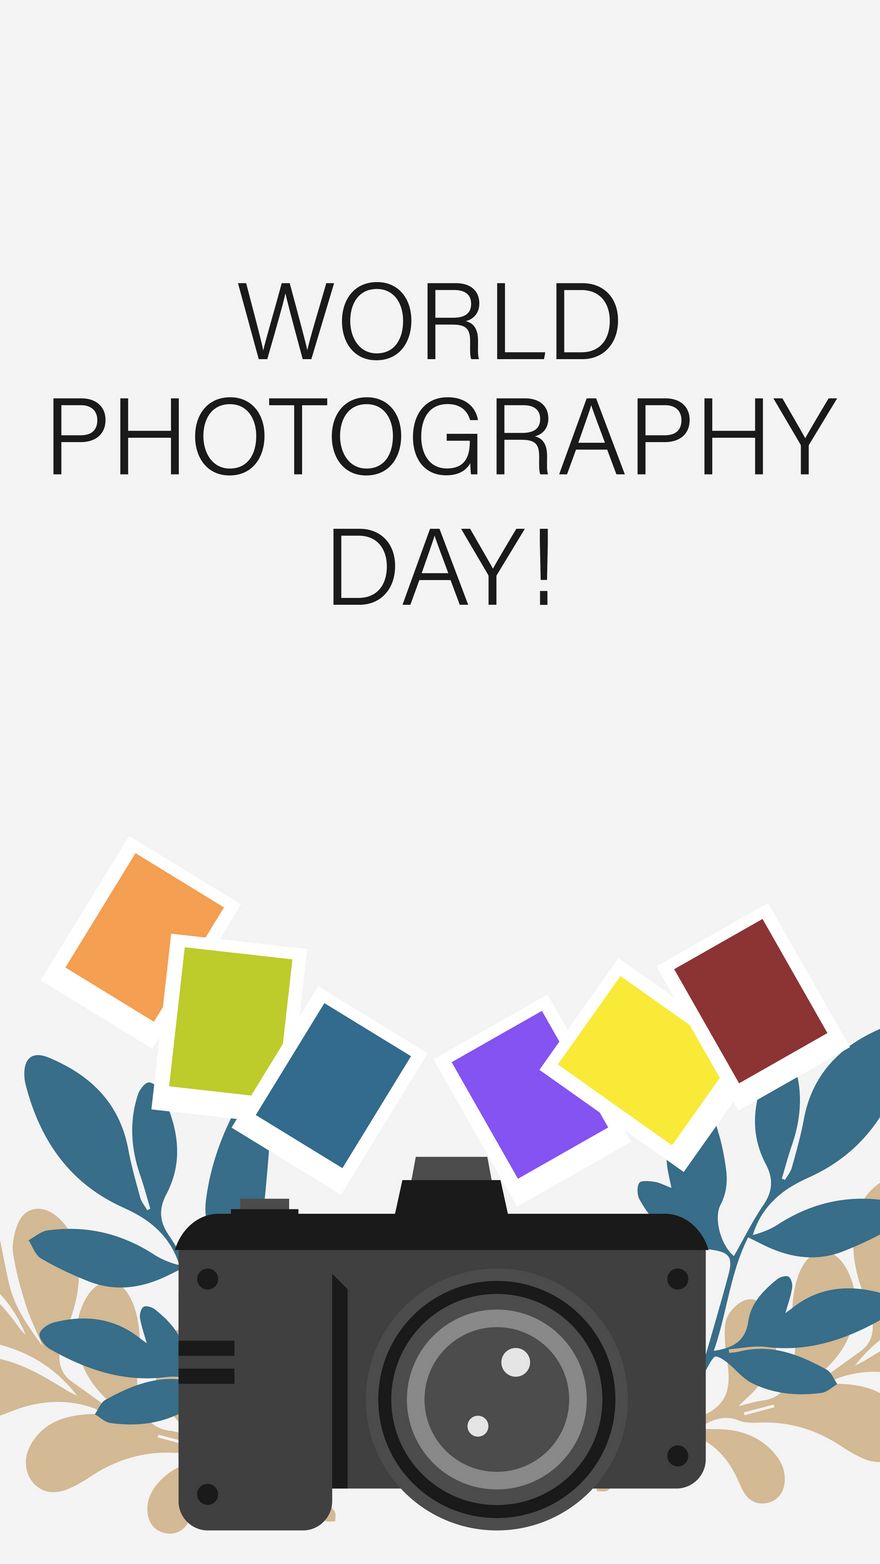 Free World Photography Day Greeting Card Background in PDF, Illustrator, PSD, EPS, SVG, JPG, PNG